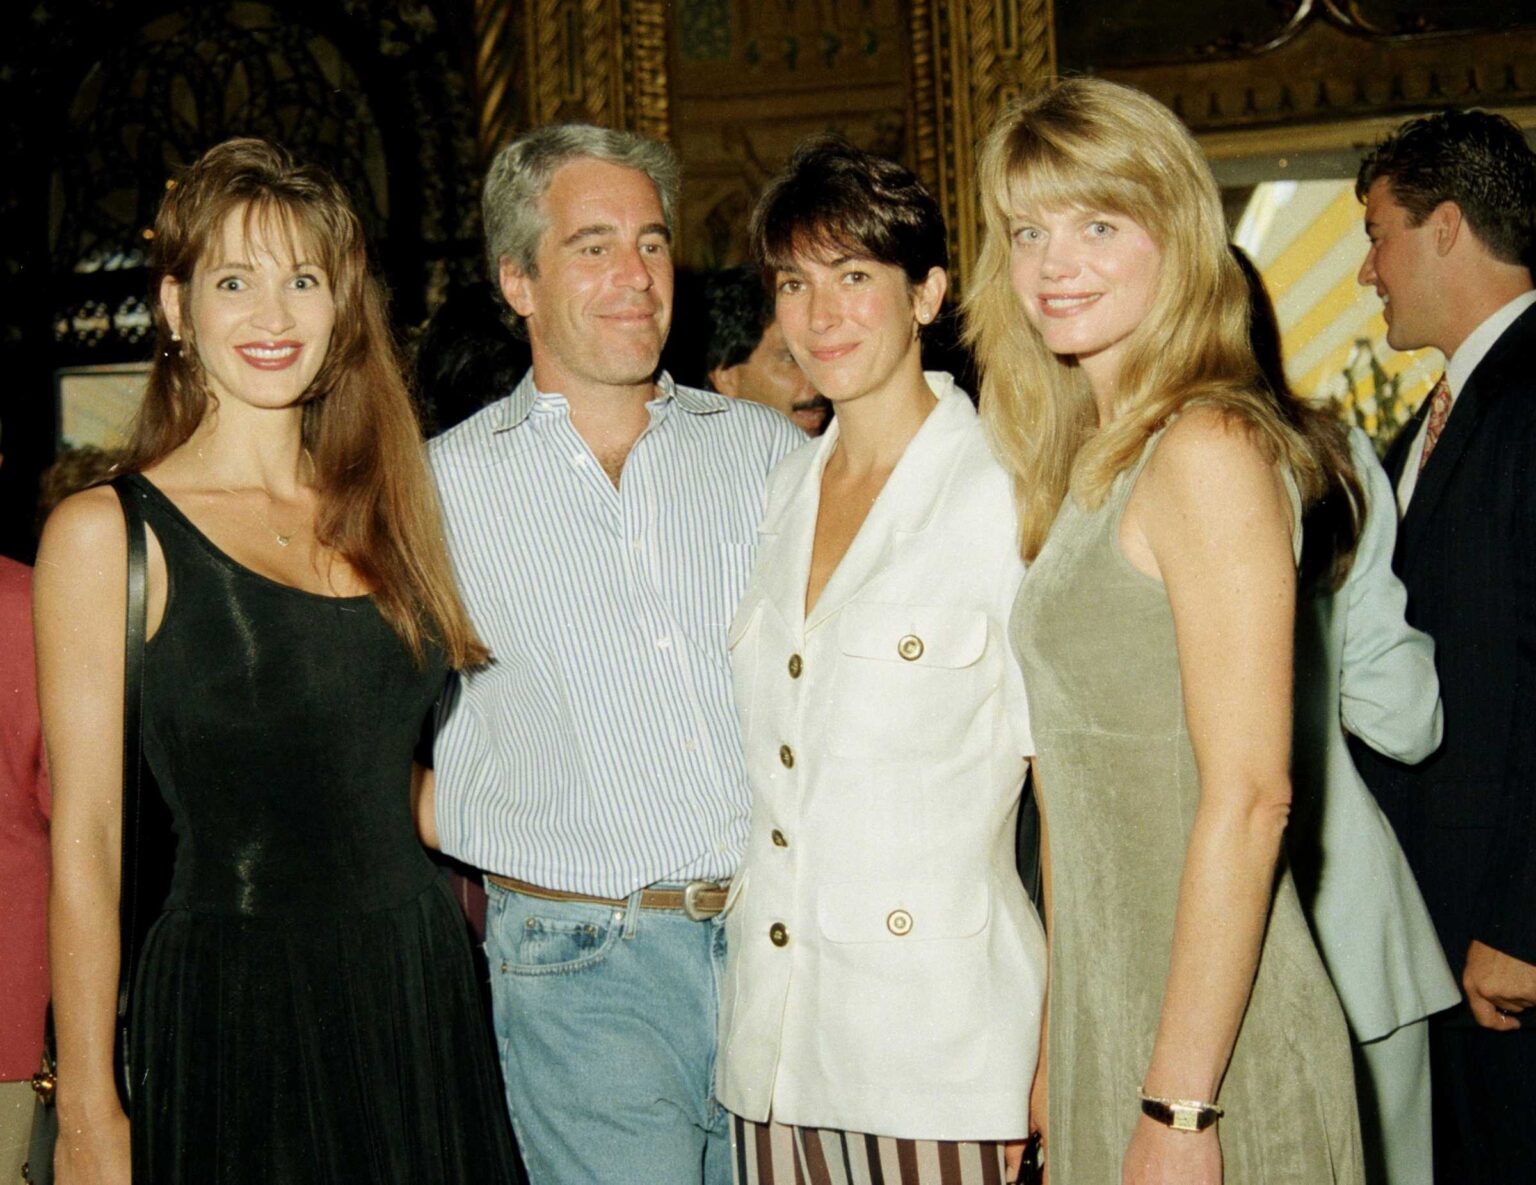 The case against Jeffrey Epstein and Ghislaine Maxwell has kept us on our toes. What went on in Epstein's house?